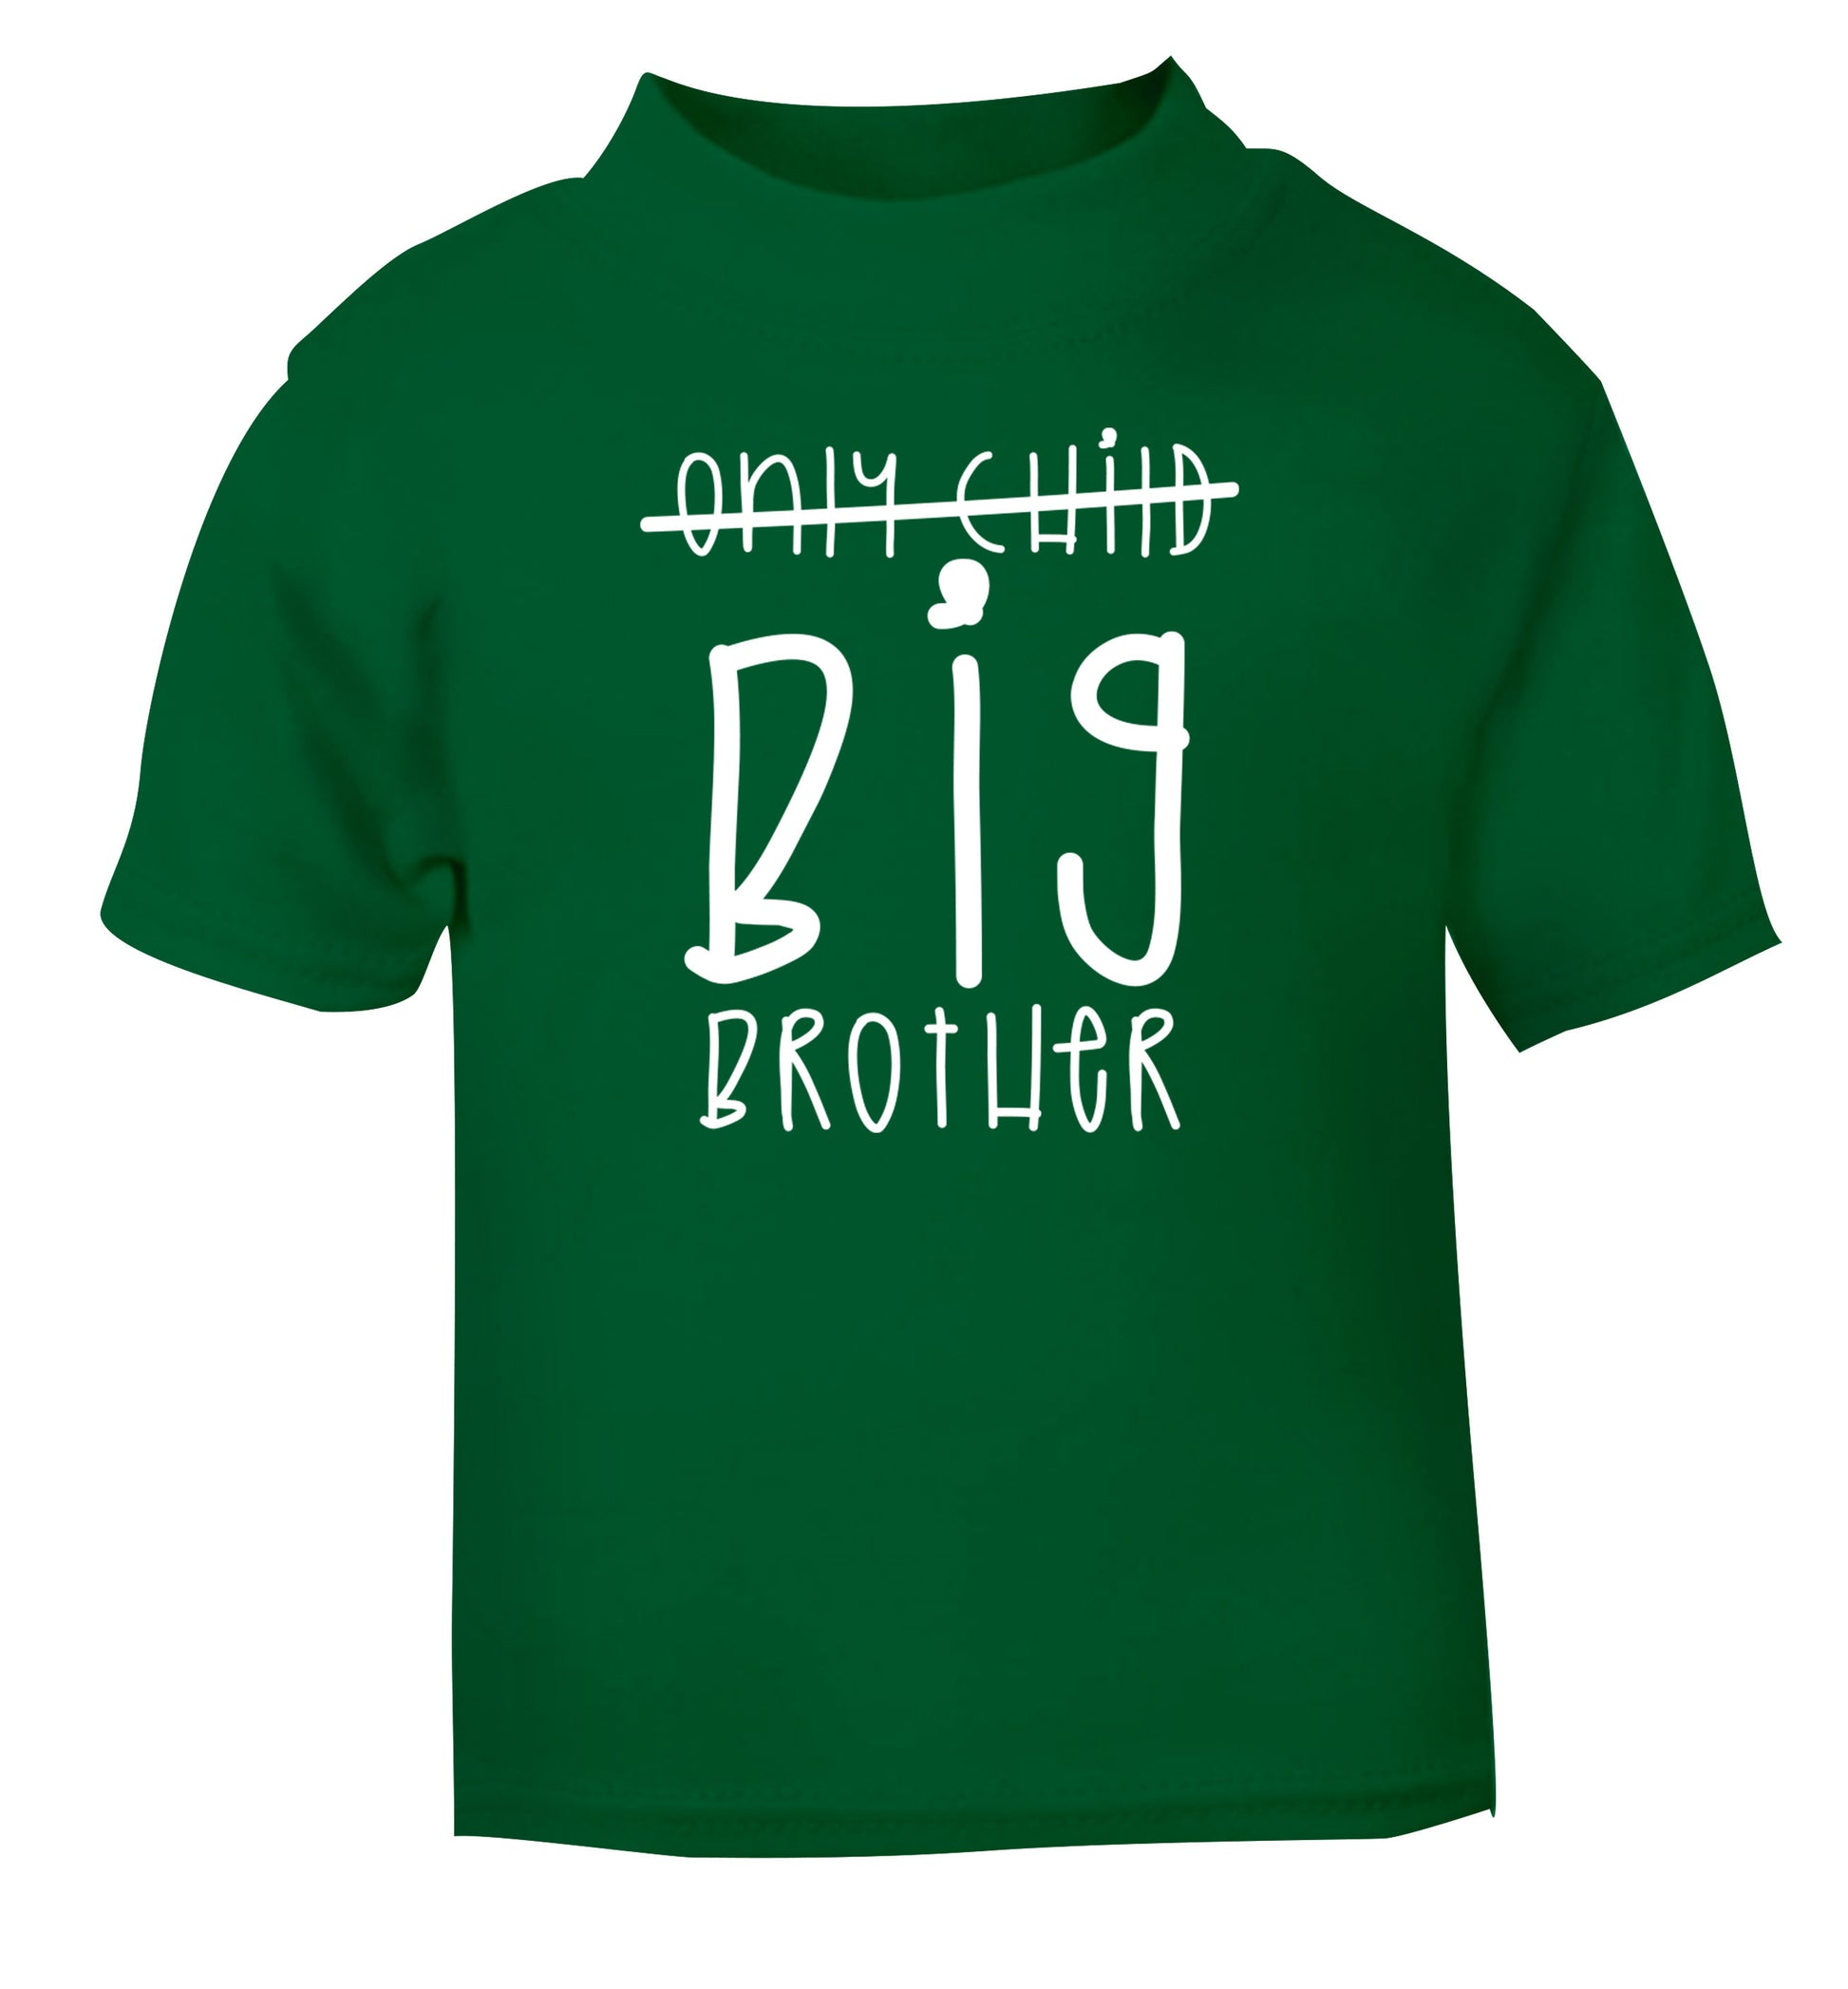 Only child big brother green Baby Toddler Tshirt 2 Years